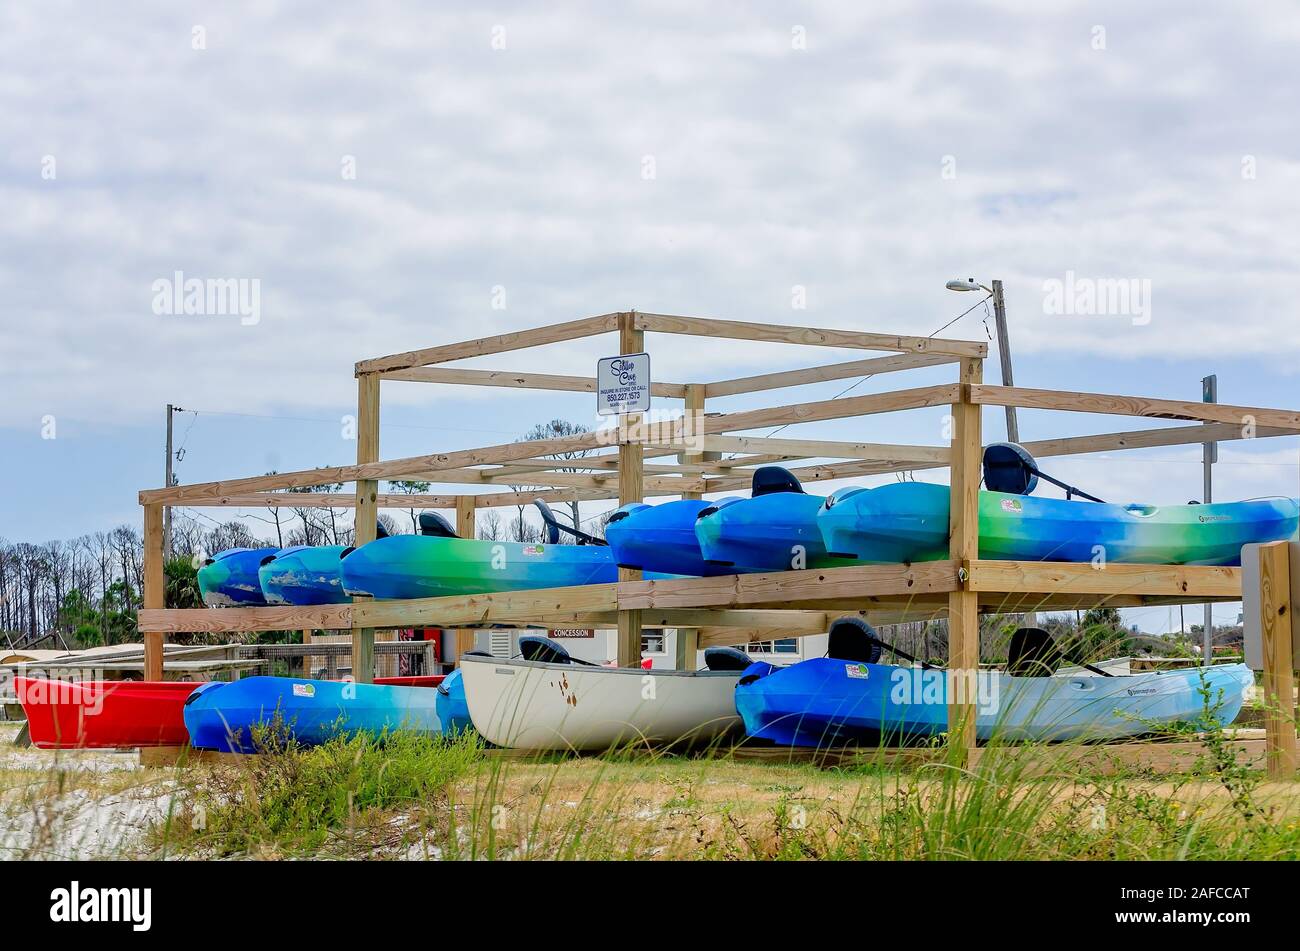 Kayaks are stacked for rental at St. Joseph Peninsula State Park, Sept. 22, 2019, in Port St. Joe, Florida. Stock Photo